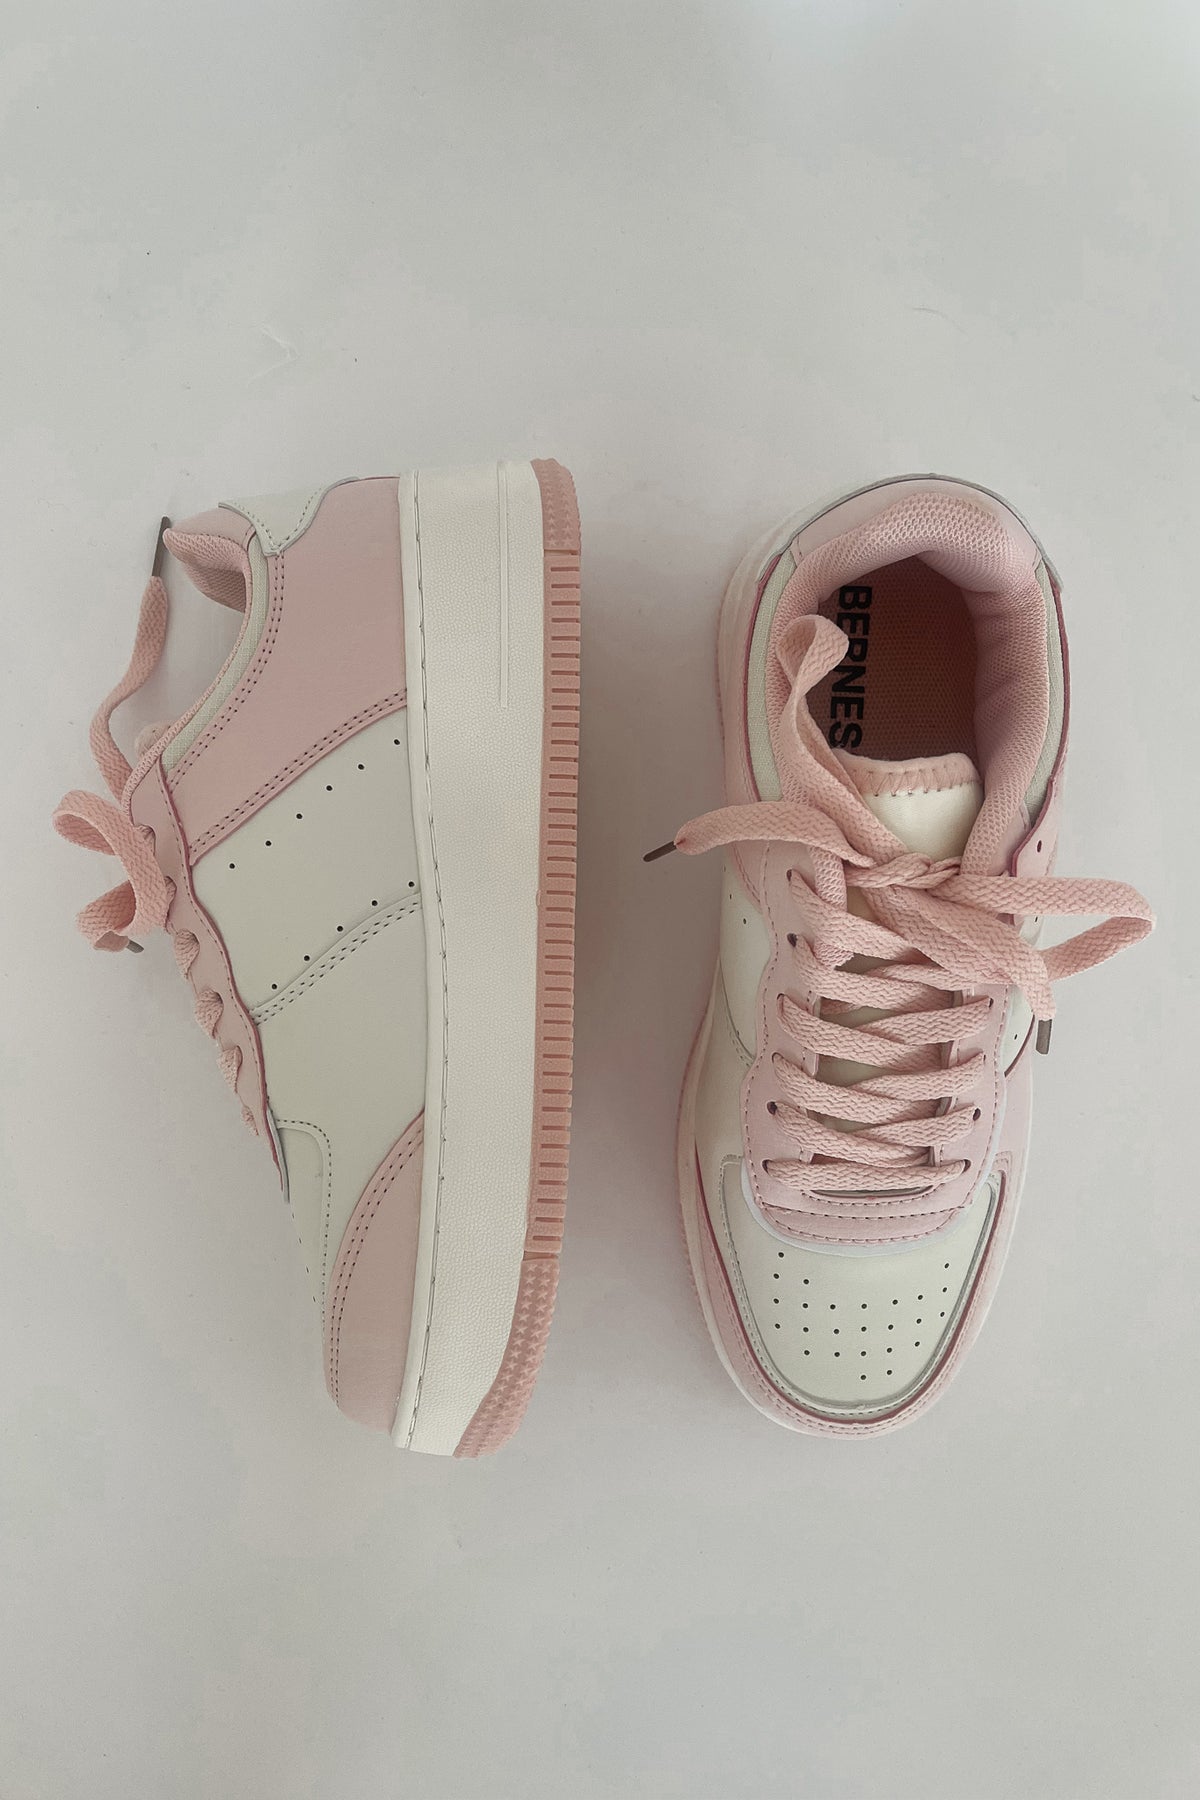 Paola Pastel Sneakers in Baby Pink | Size 5 | 100% Leather | American Threads